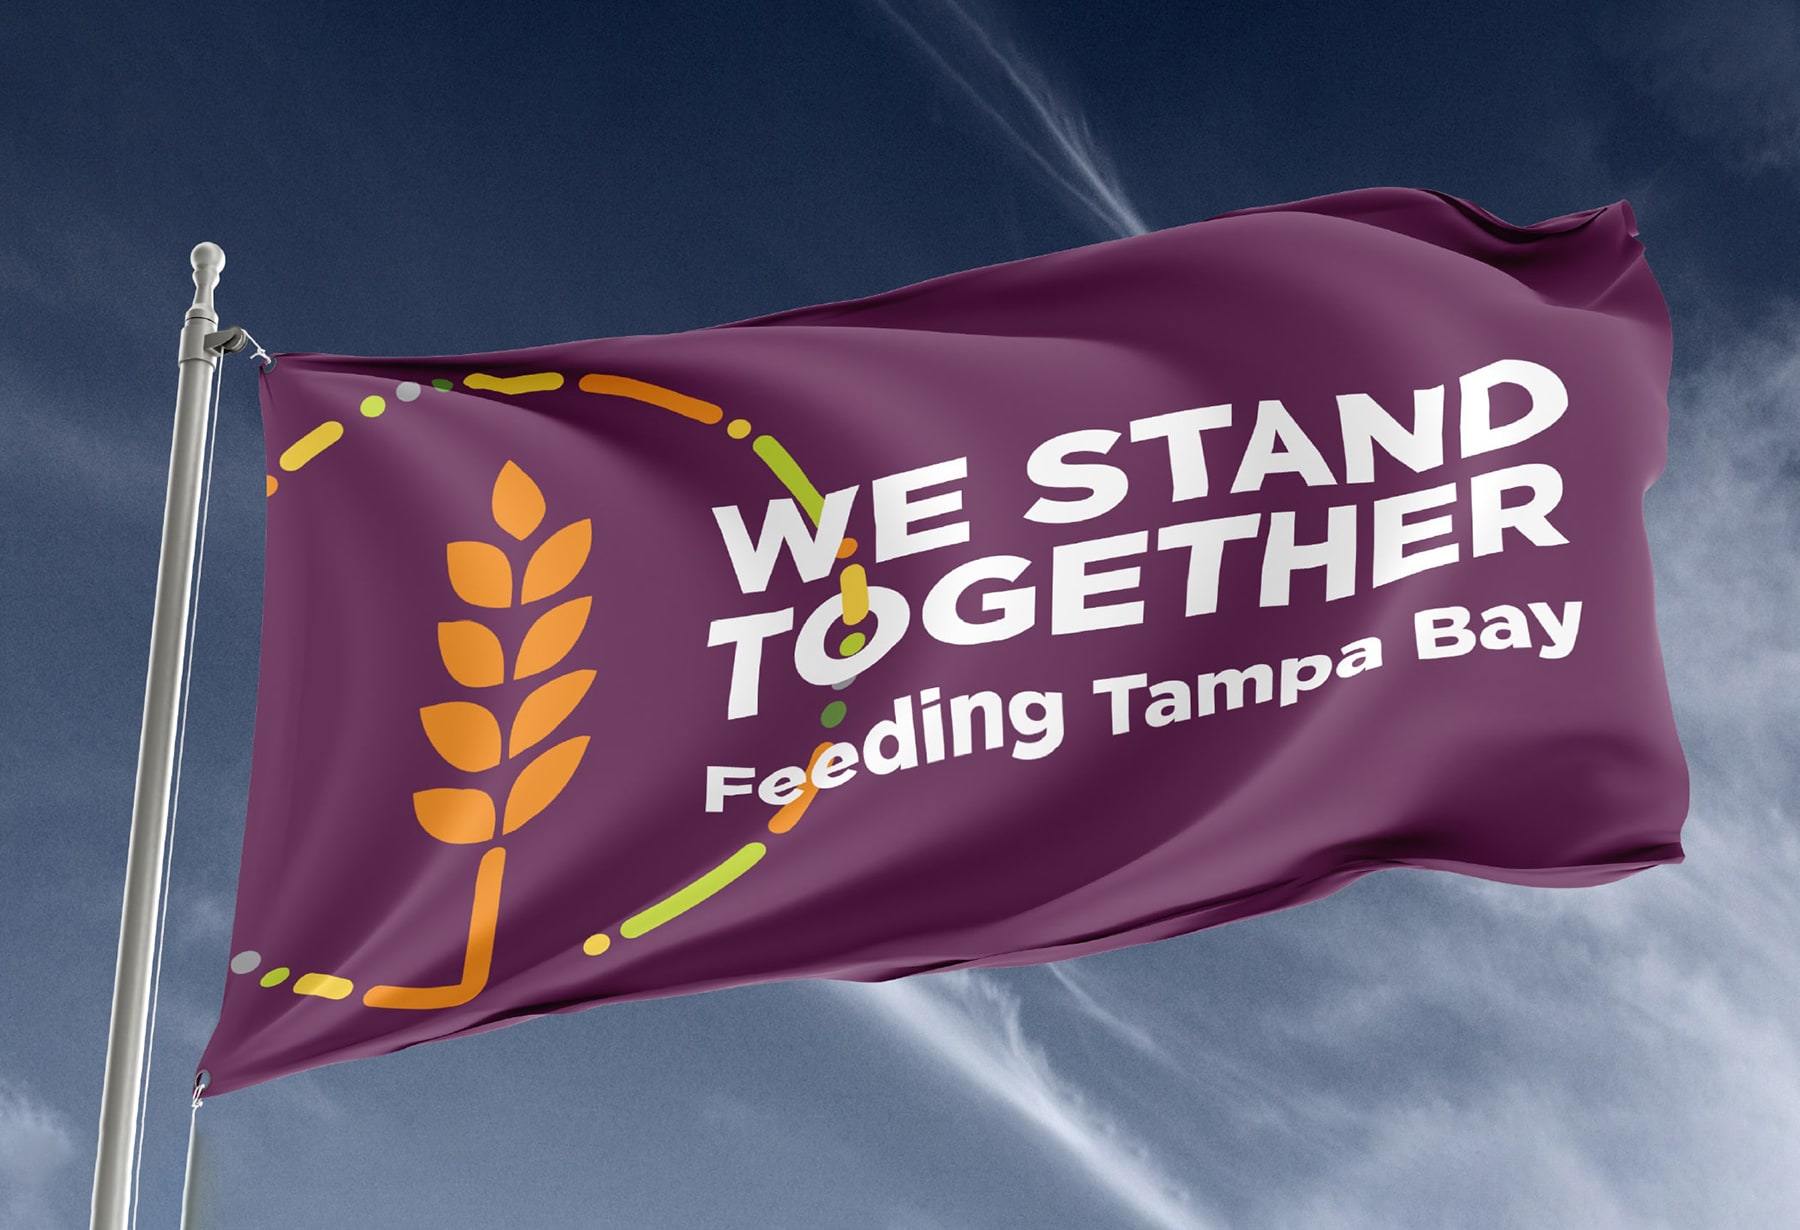 Feeding Tampa Bay flag - We Stand Together